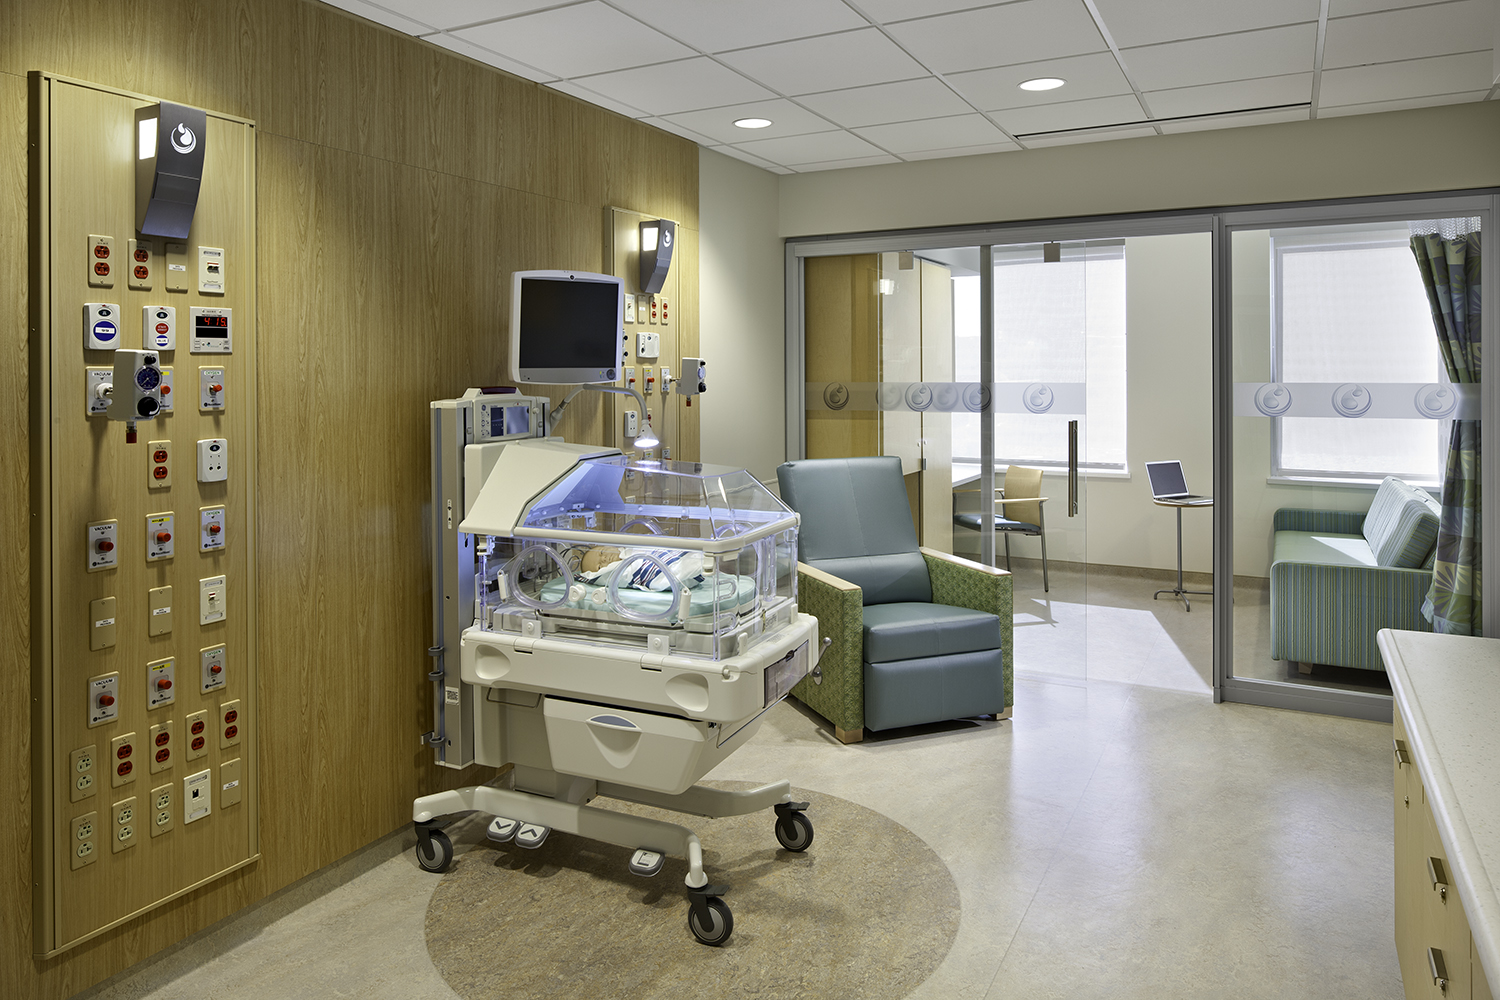 Cypress custom light fixtures in a NICU patient room, mounted on a wood paneled headwall.